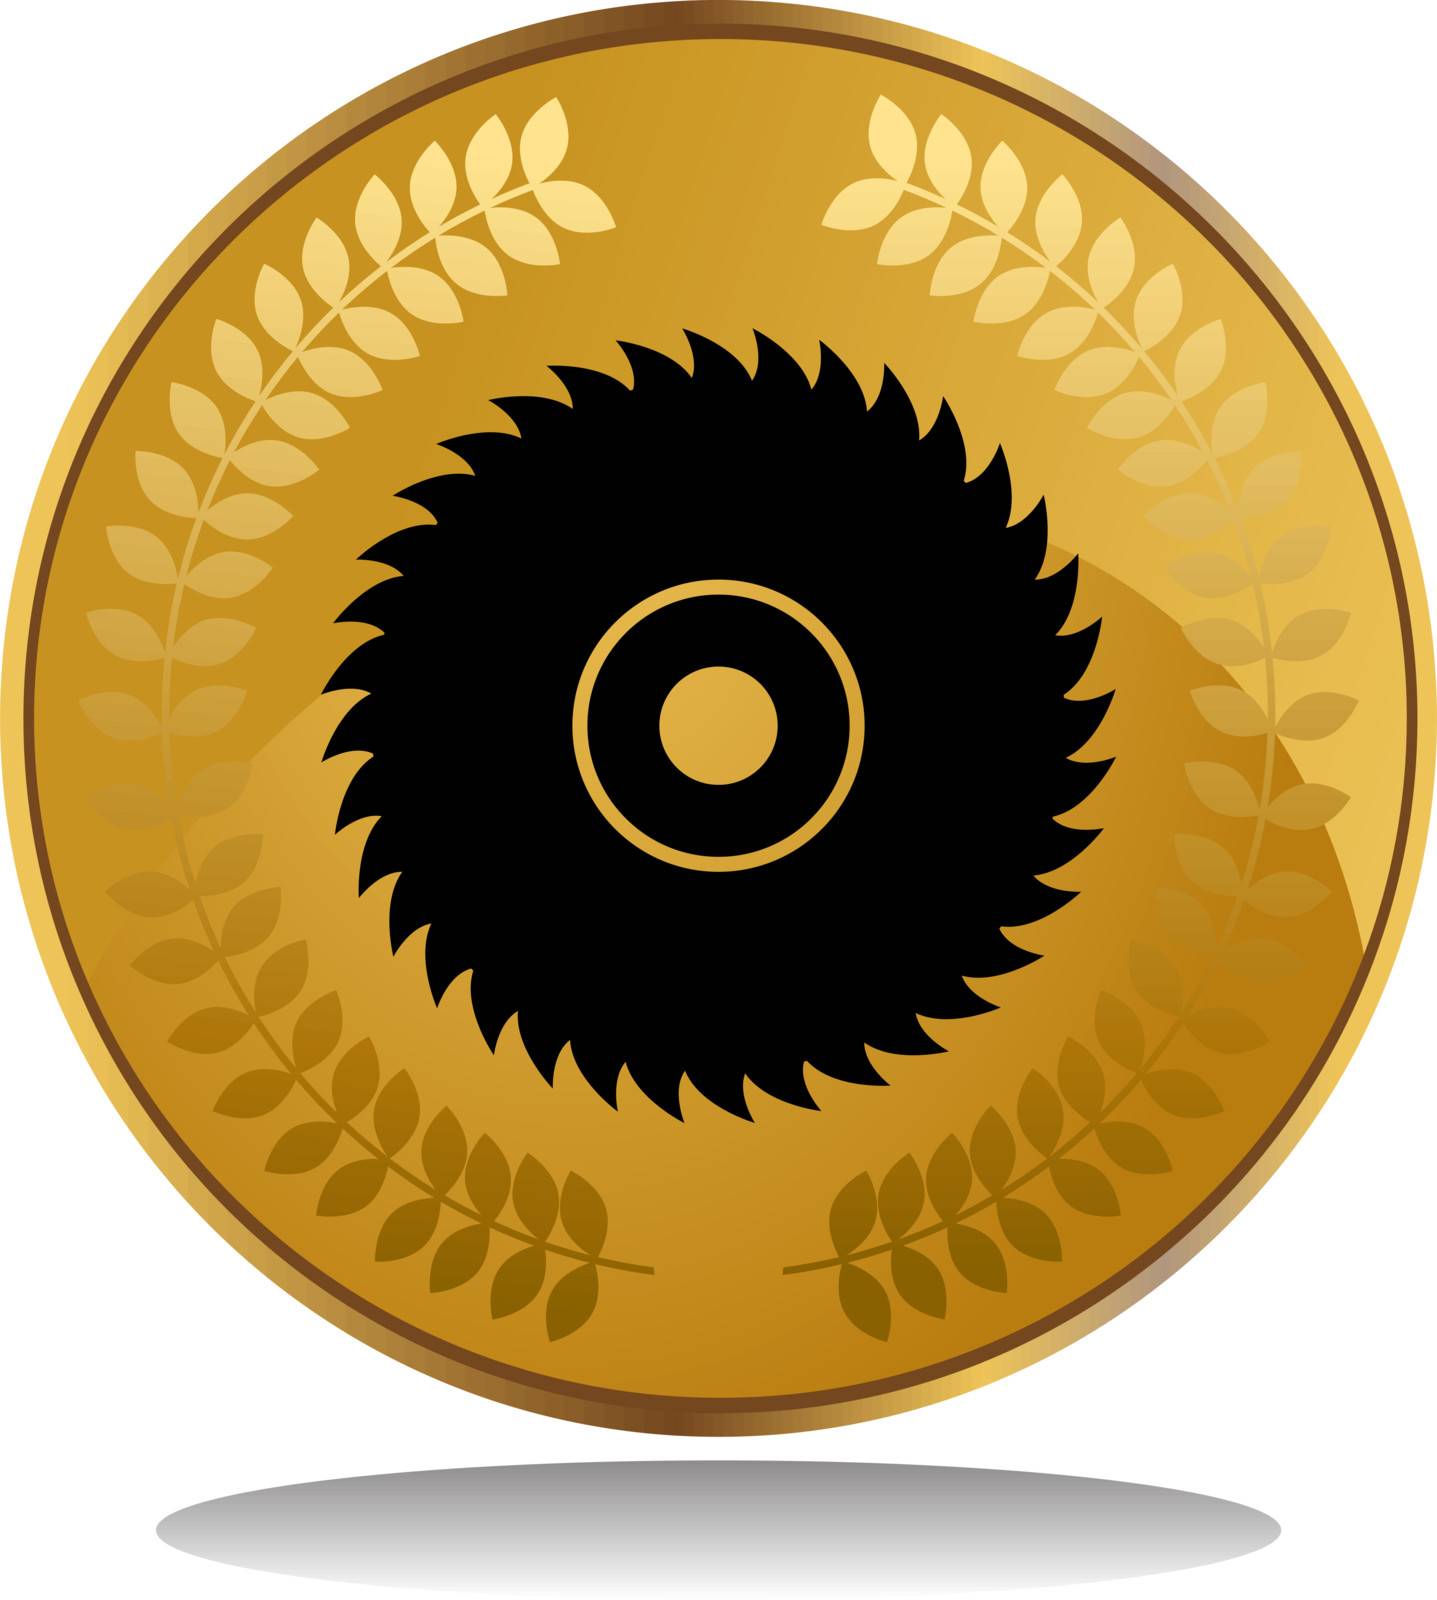 Gold Coin - Saw Blade by cteconsulting